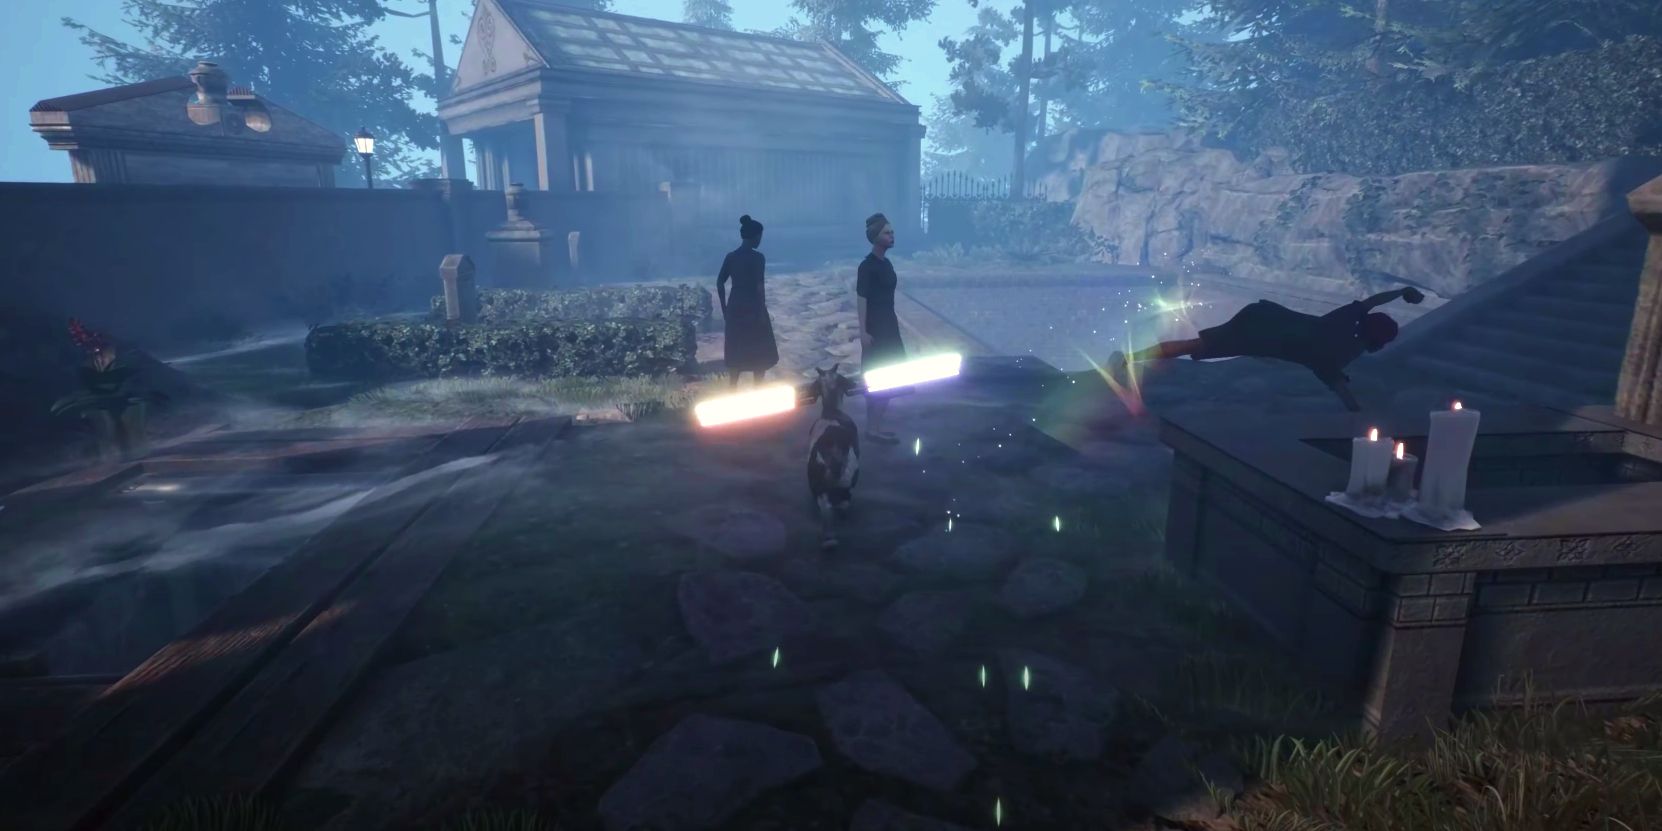 A player using the Pridesaber 2.0 against NPCs in Goat Simulator 3's Star Wars Easter egg.